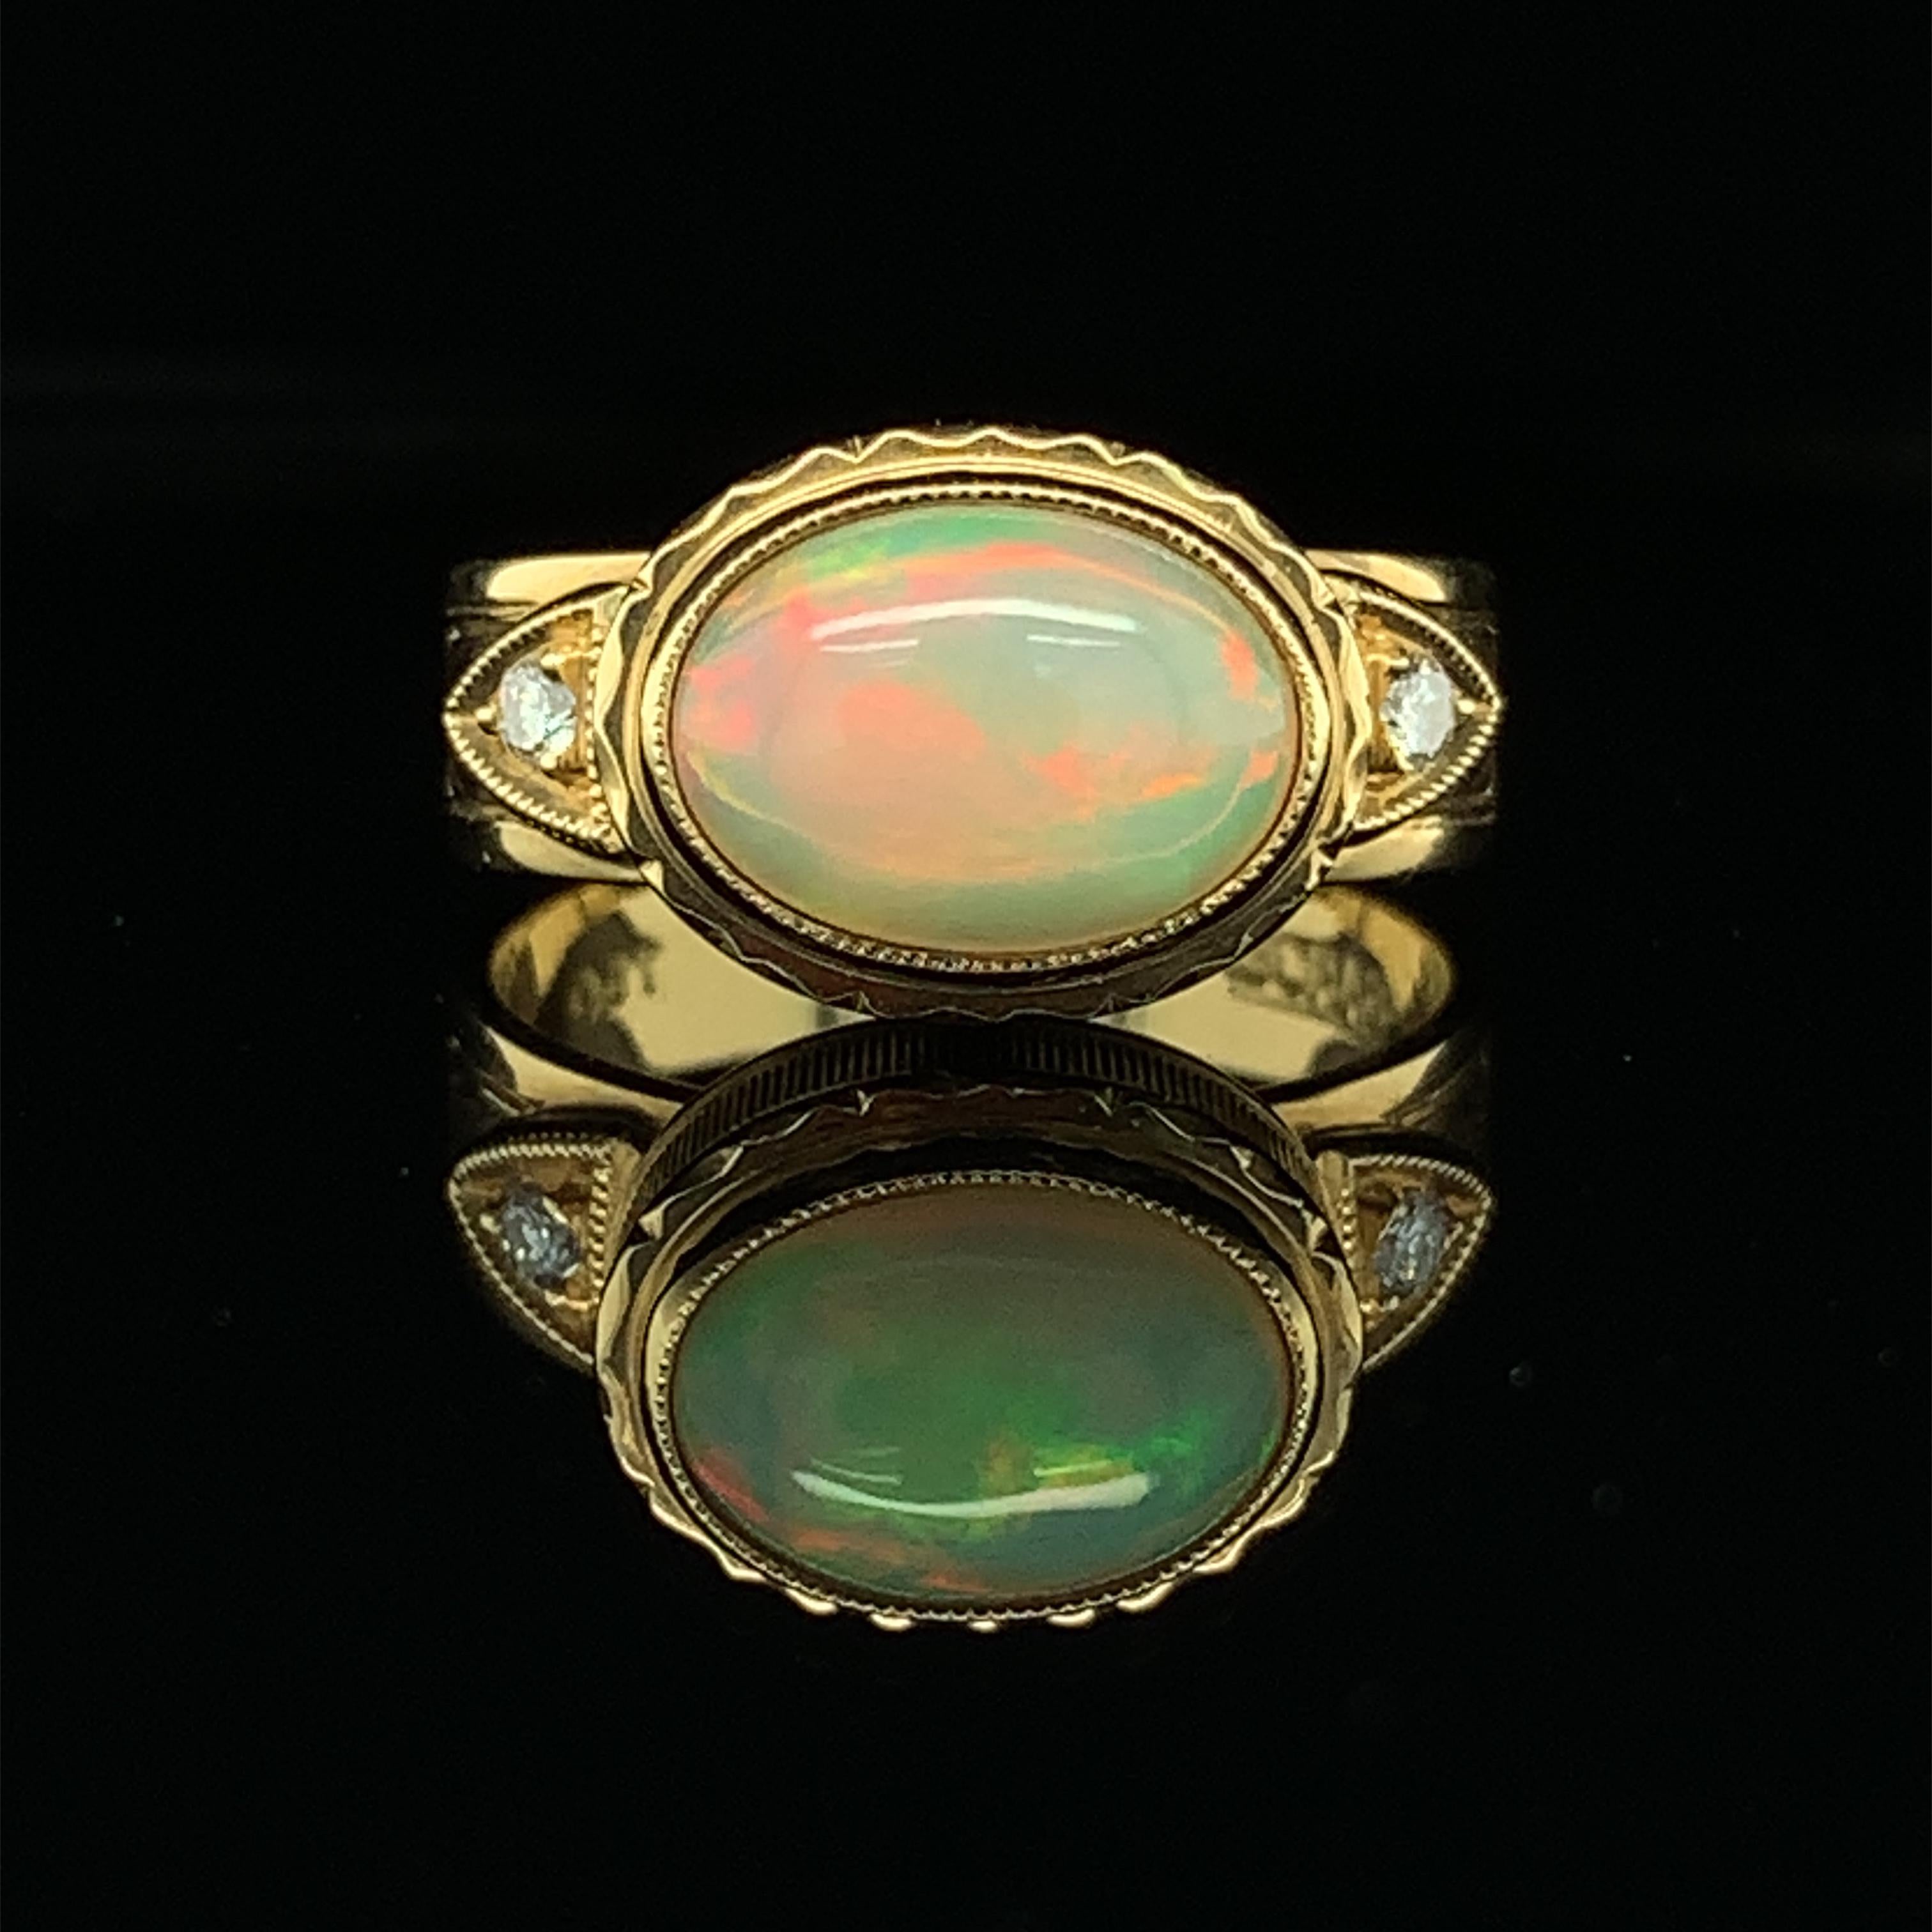 This ring is a brilliantly bright delight for your finger! A colorful 1.44 carat opal is bezel set with sparkly diamonds in an 18k yellow gold setting that is intricately and beautifully engraved. Guaranteed to brighten any day and put a smile on